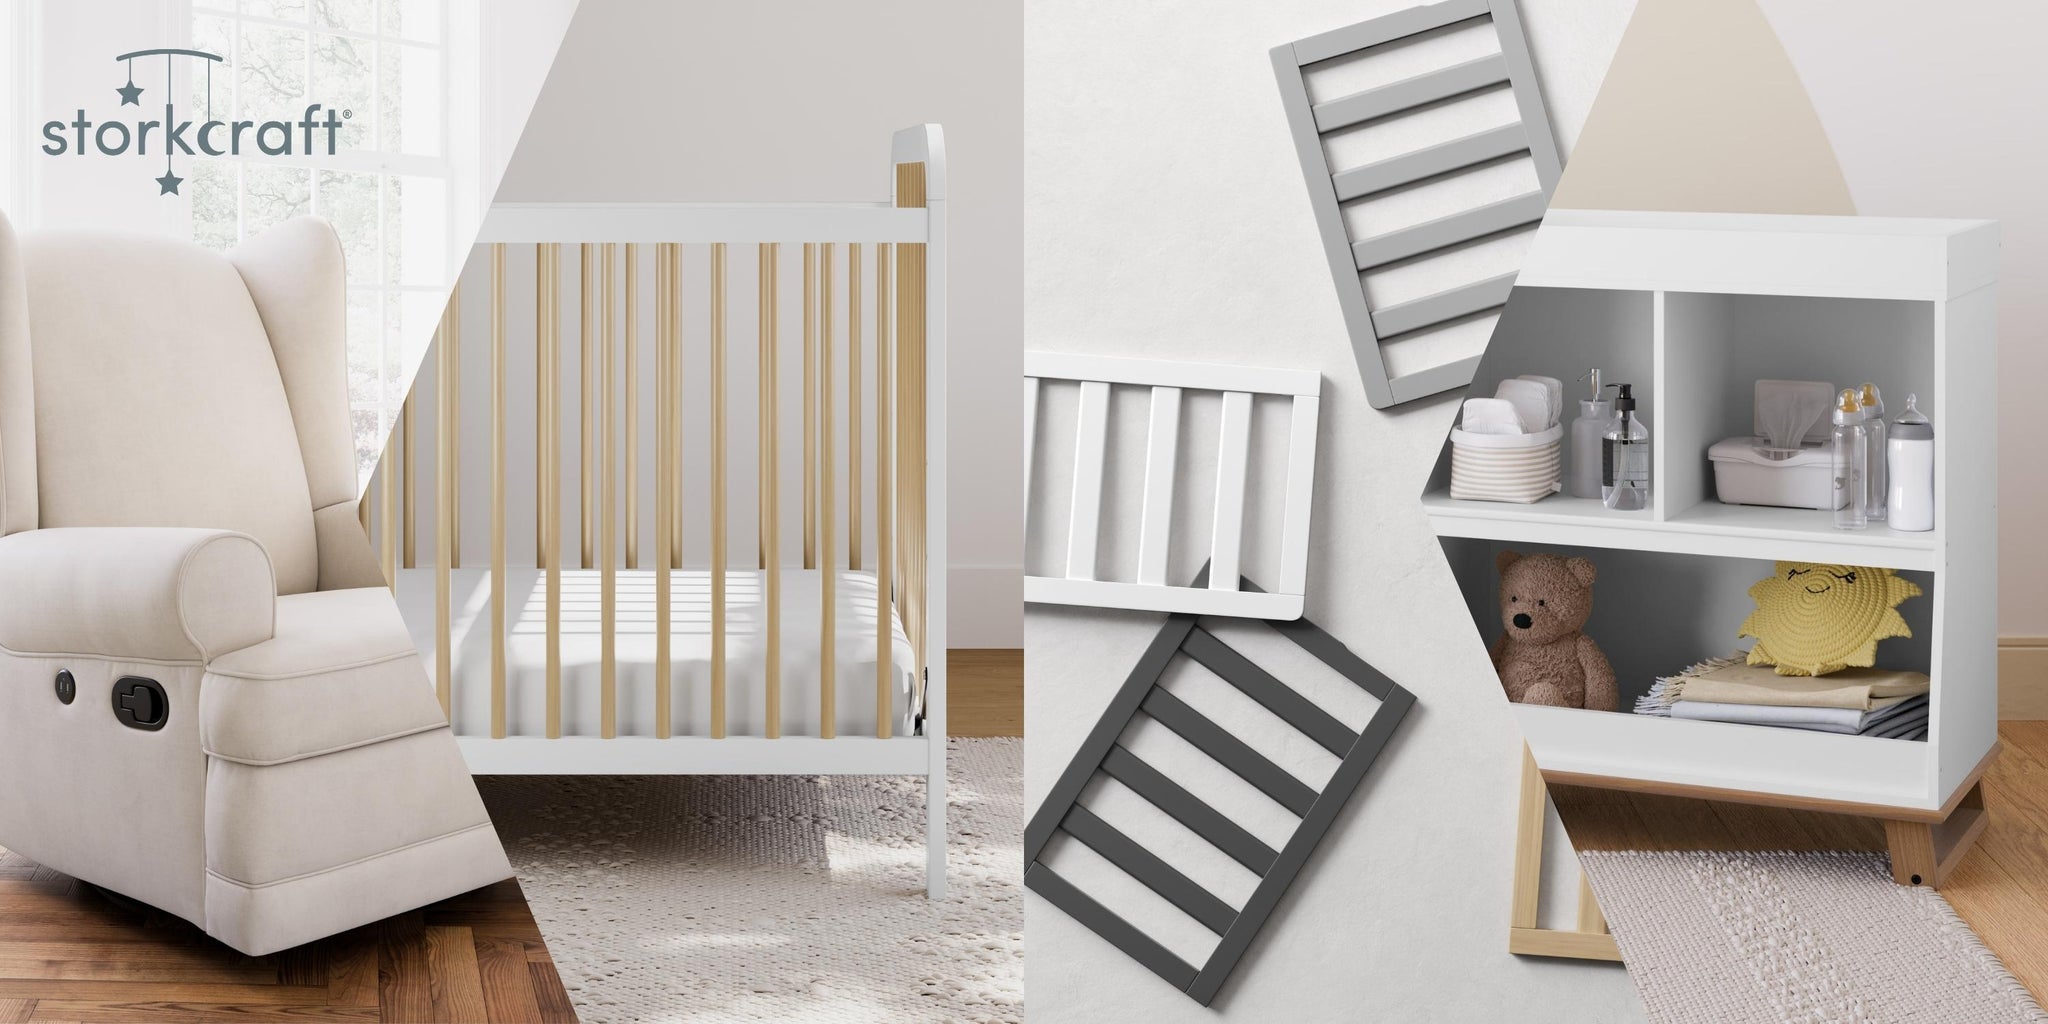 Banner image with Storkcraft logo containing various nursery items, including a beige nursery chair, white baby crib with natural wood details, toddler guardrails in various colors, and a white bookshelf